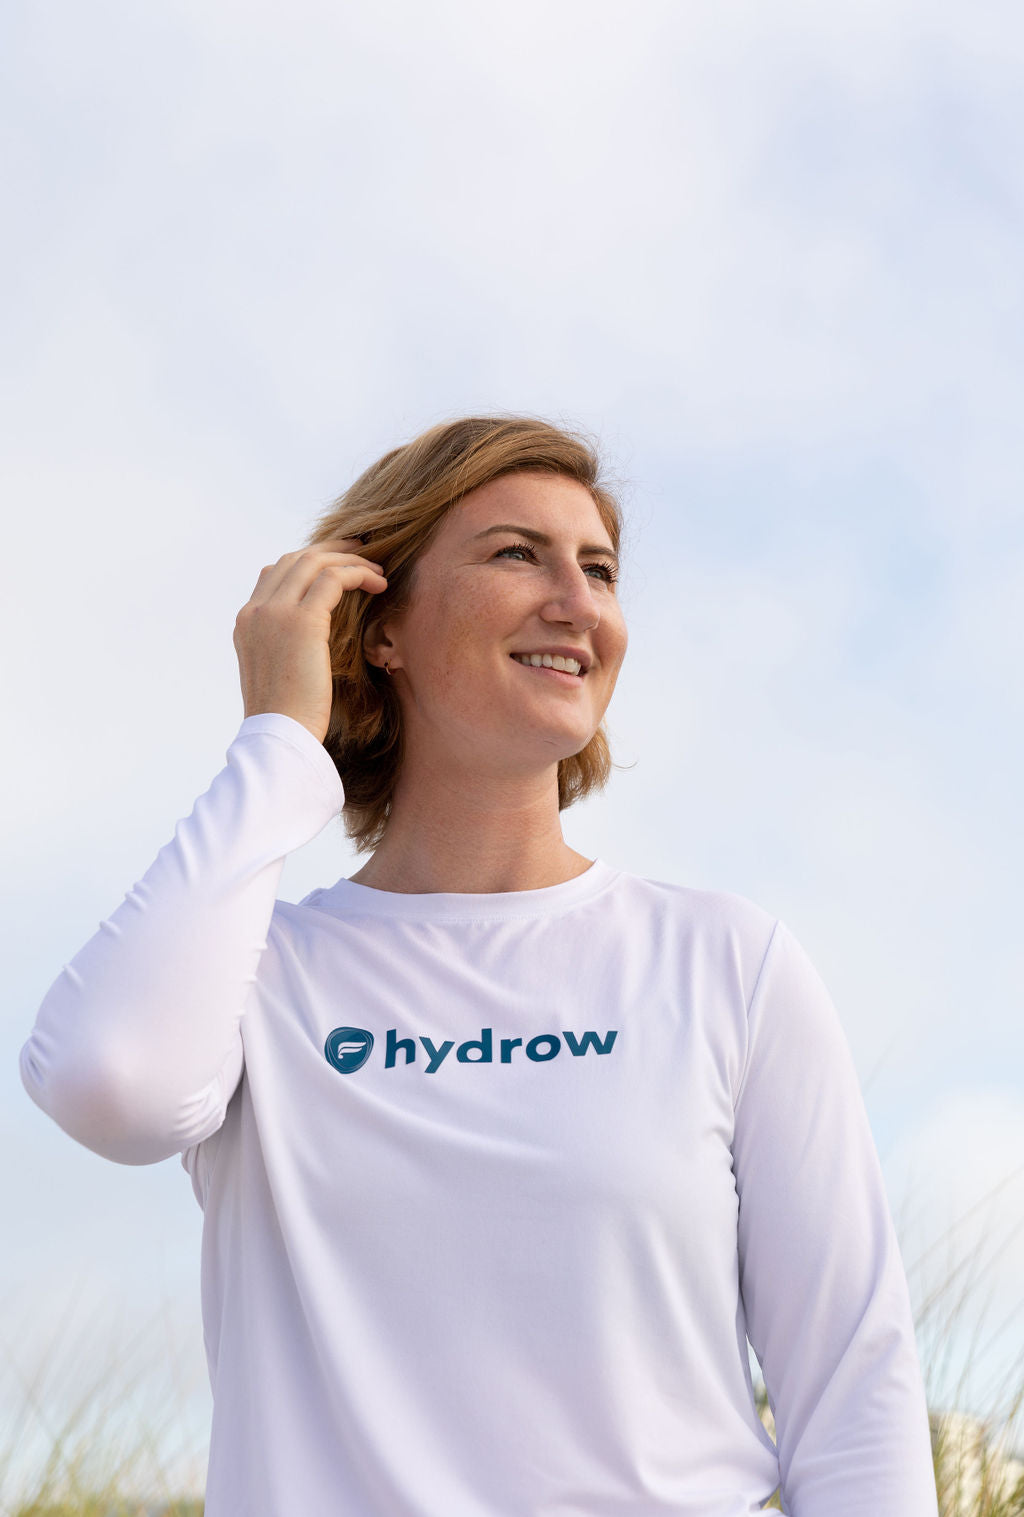 White long sleeve shirt with dark blue Fabletics and hydrow logo on front